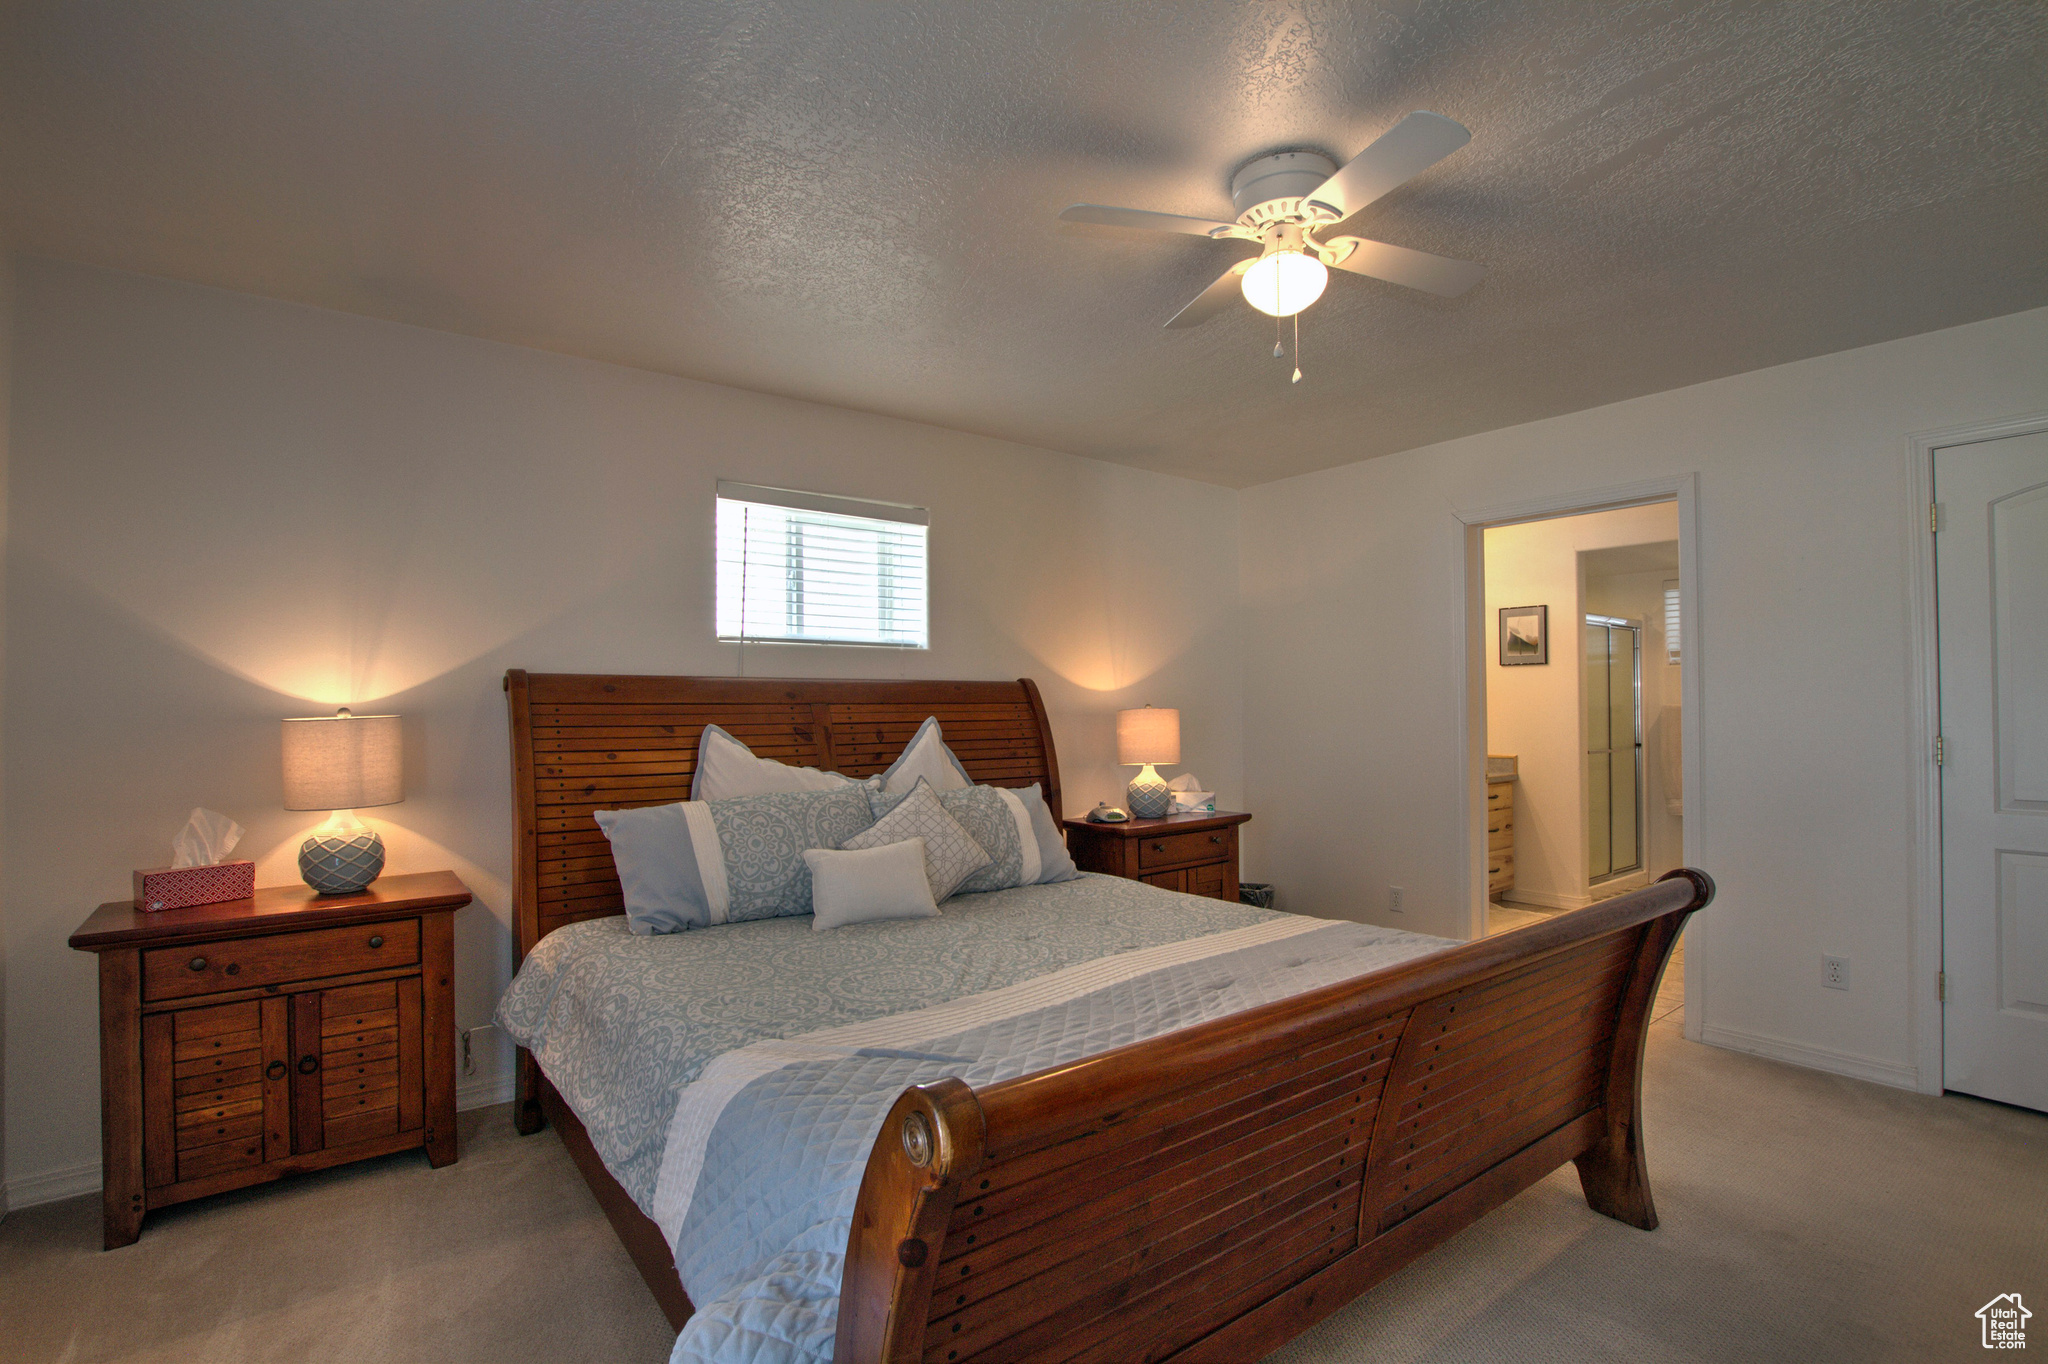 Bedroom featuring light colored carpet, ensuite bathroom, a textured ceiling, and ceiling fan